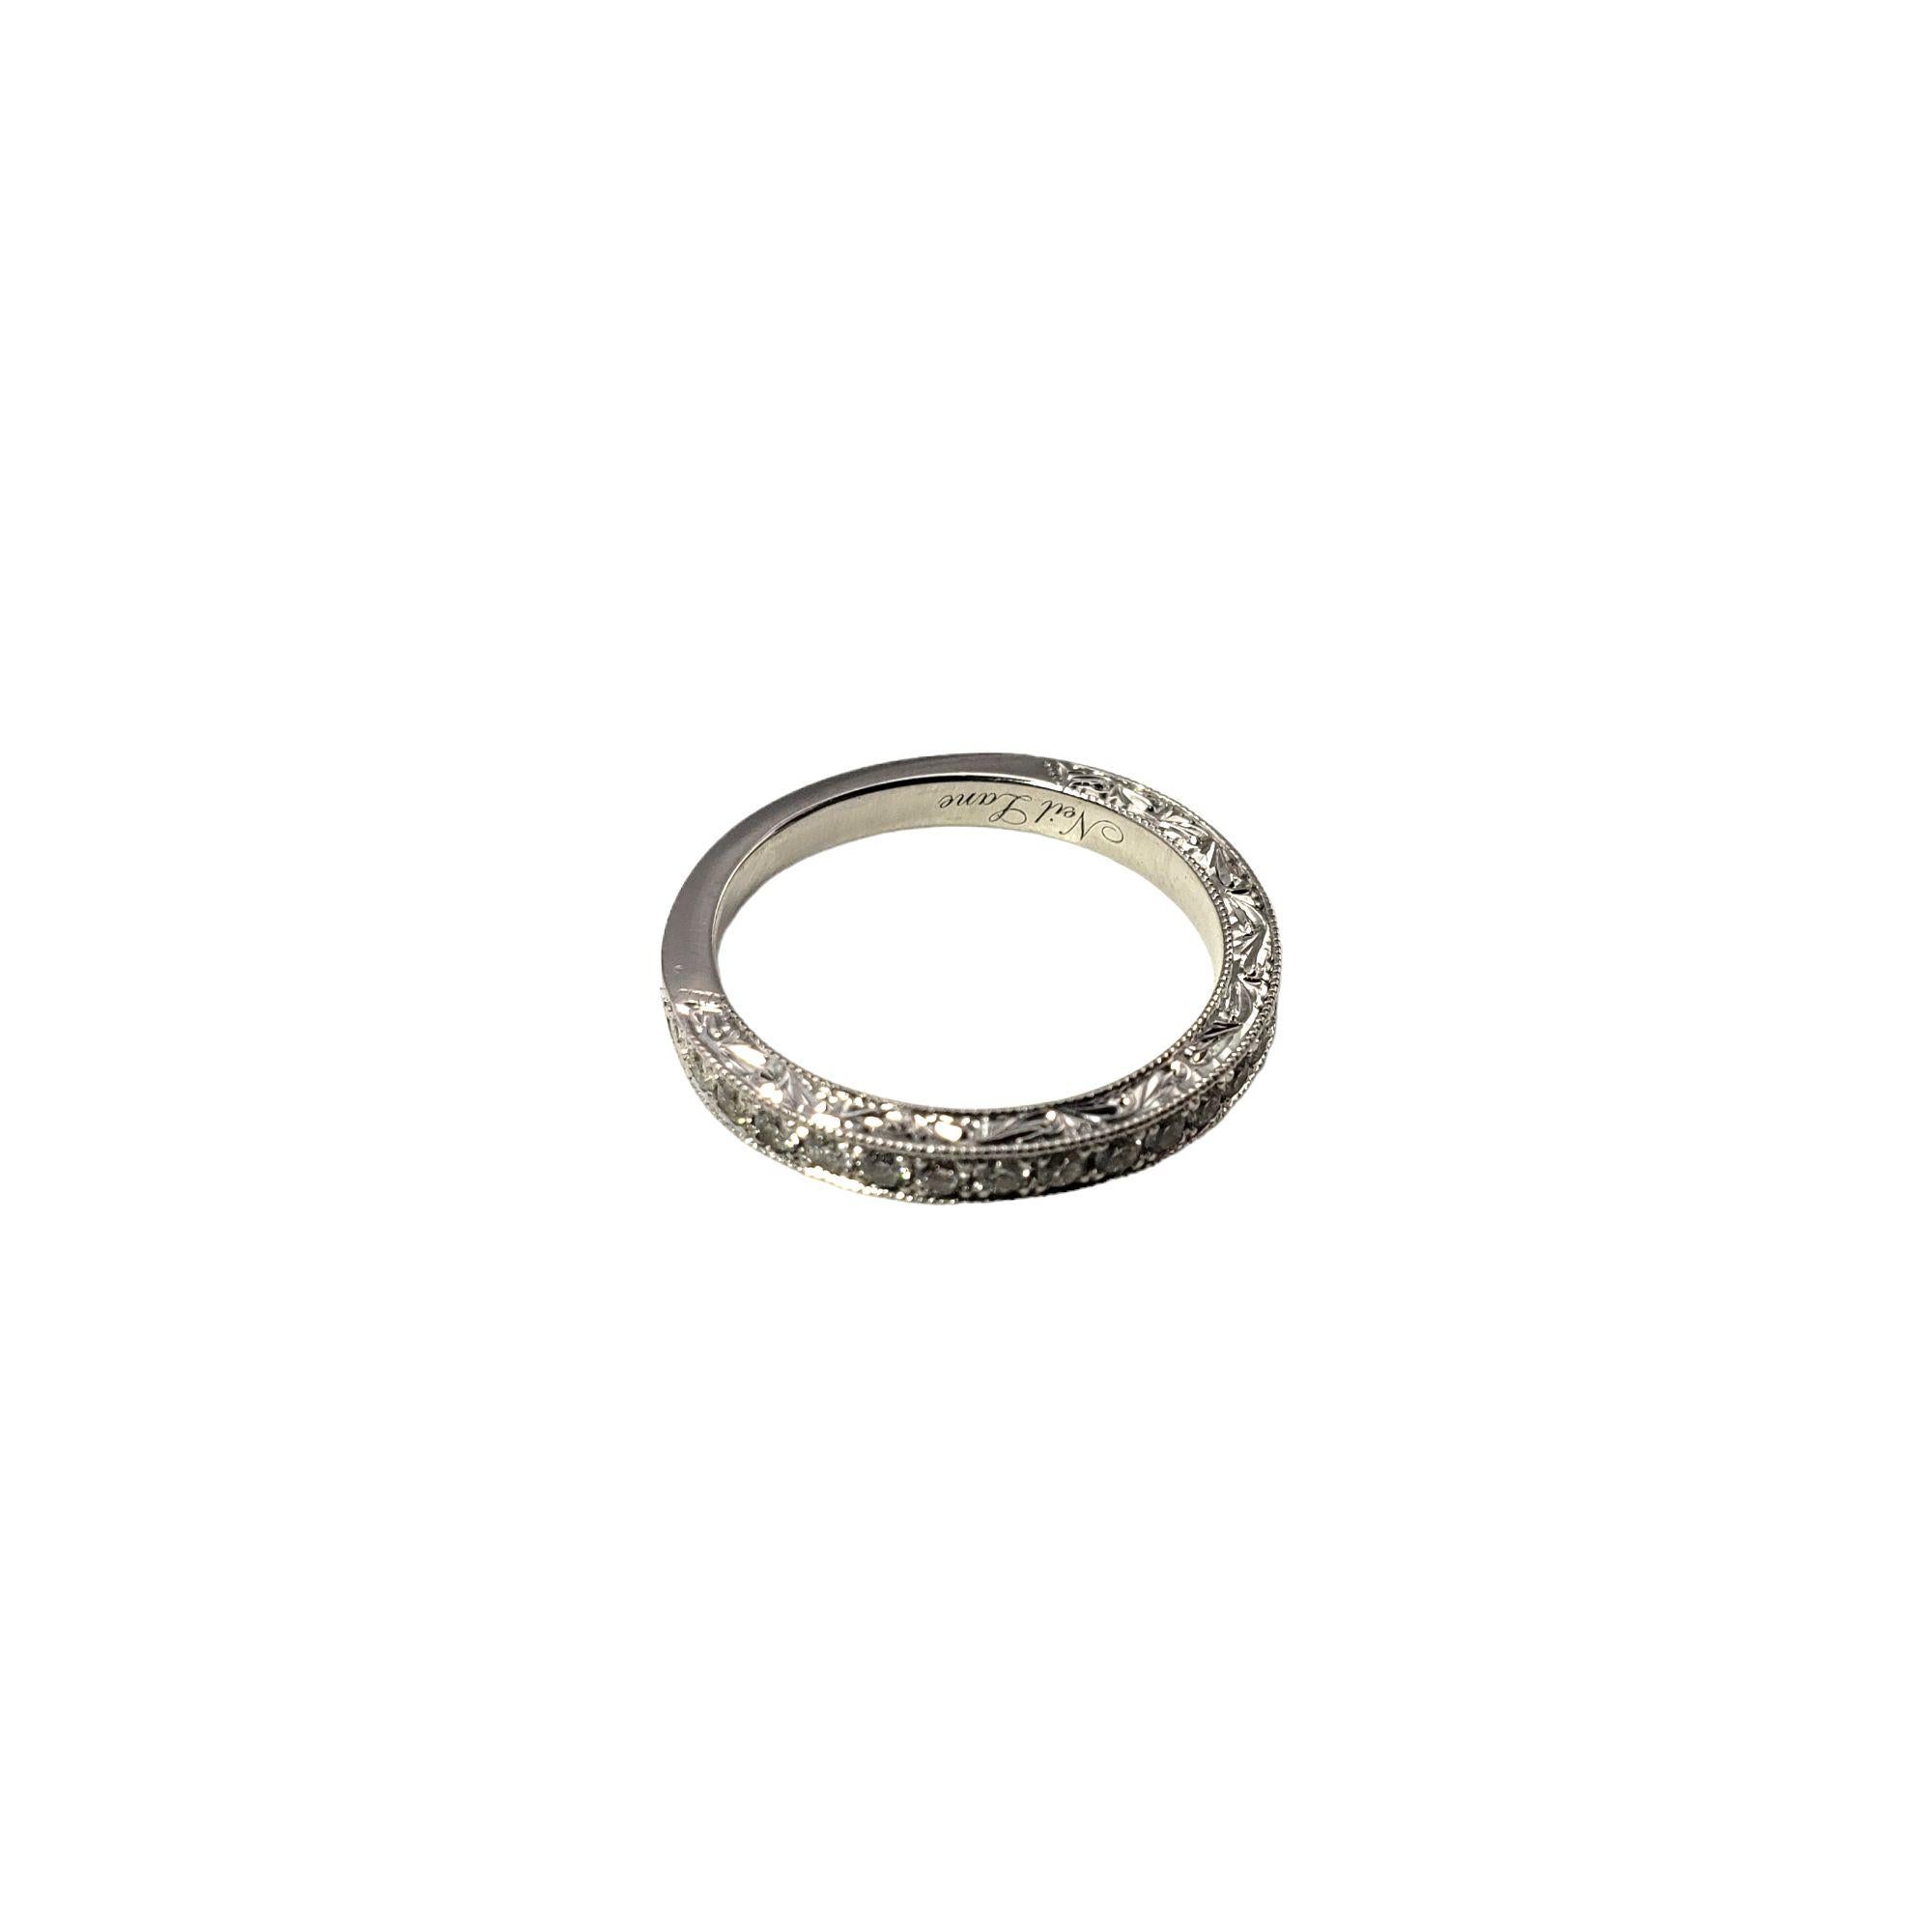 5.75 ring size in mm